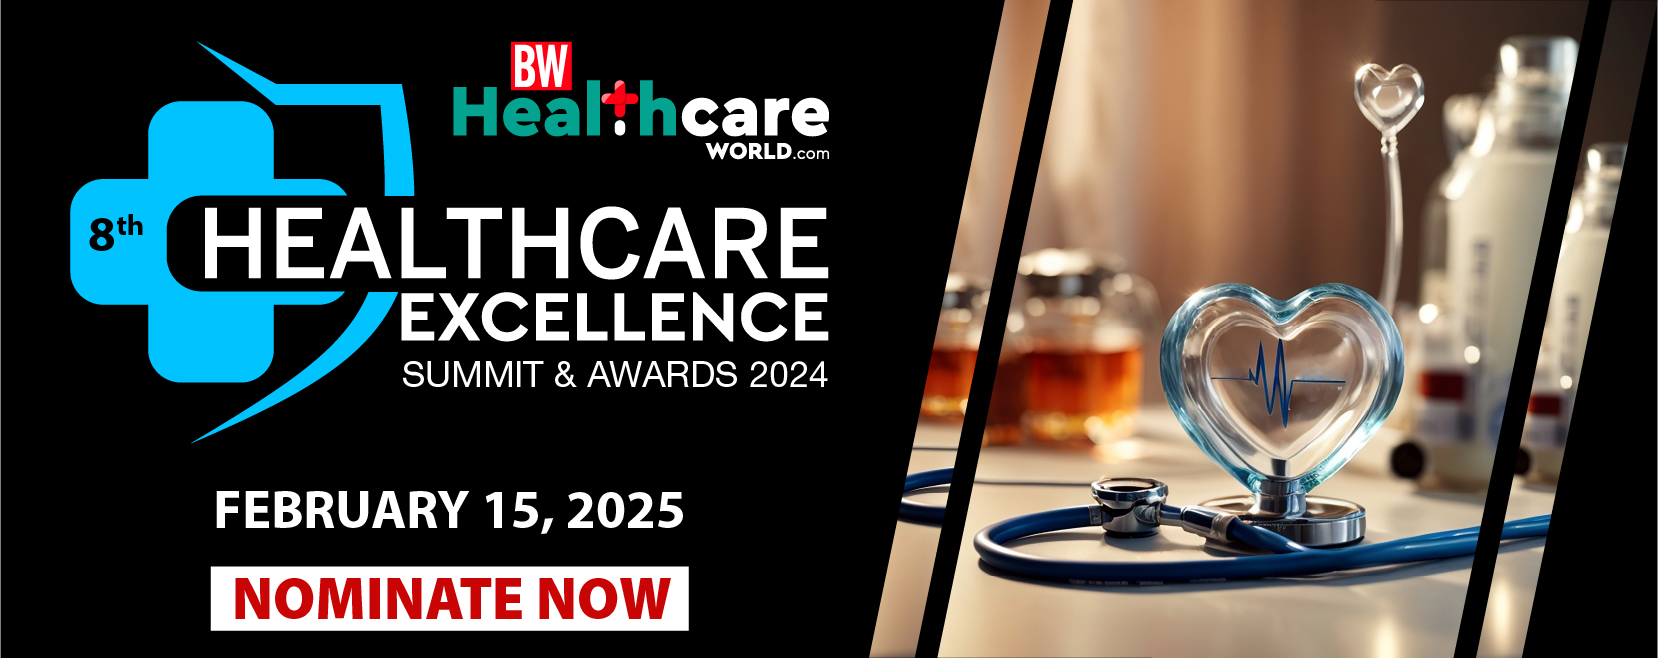 BW Healthcare Excellence Awards 2025